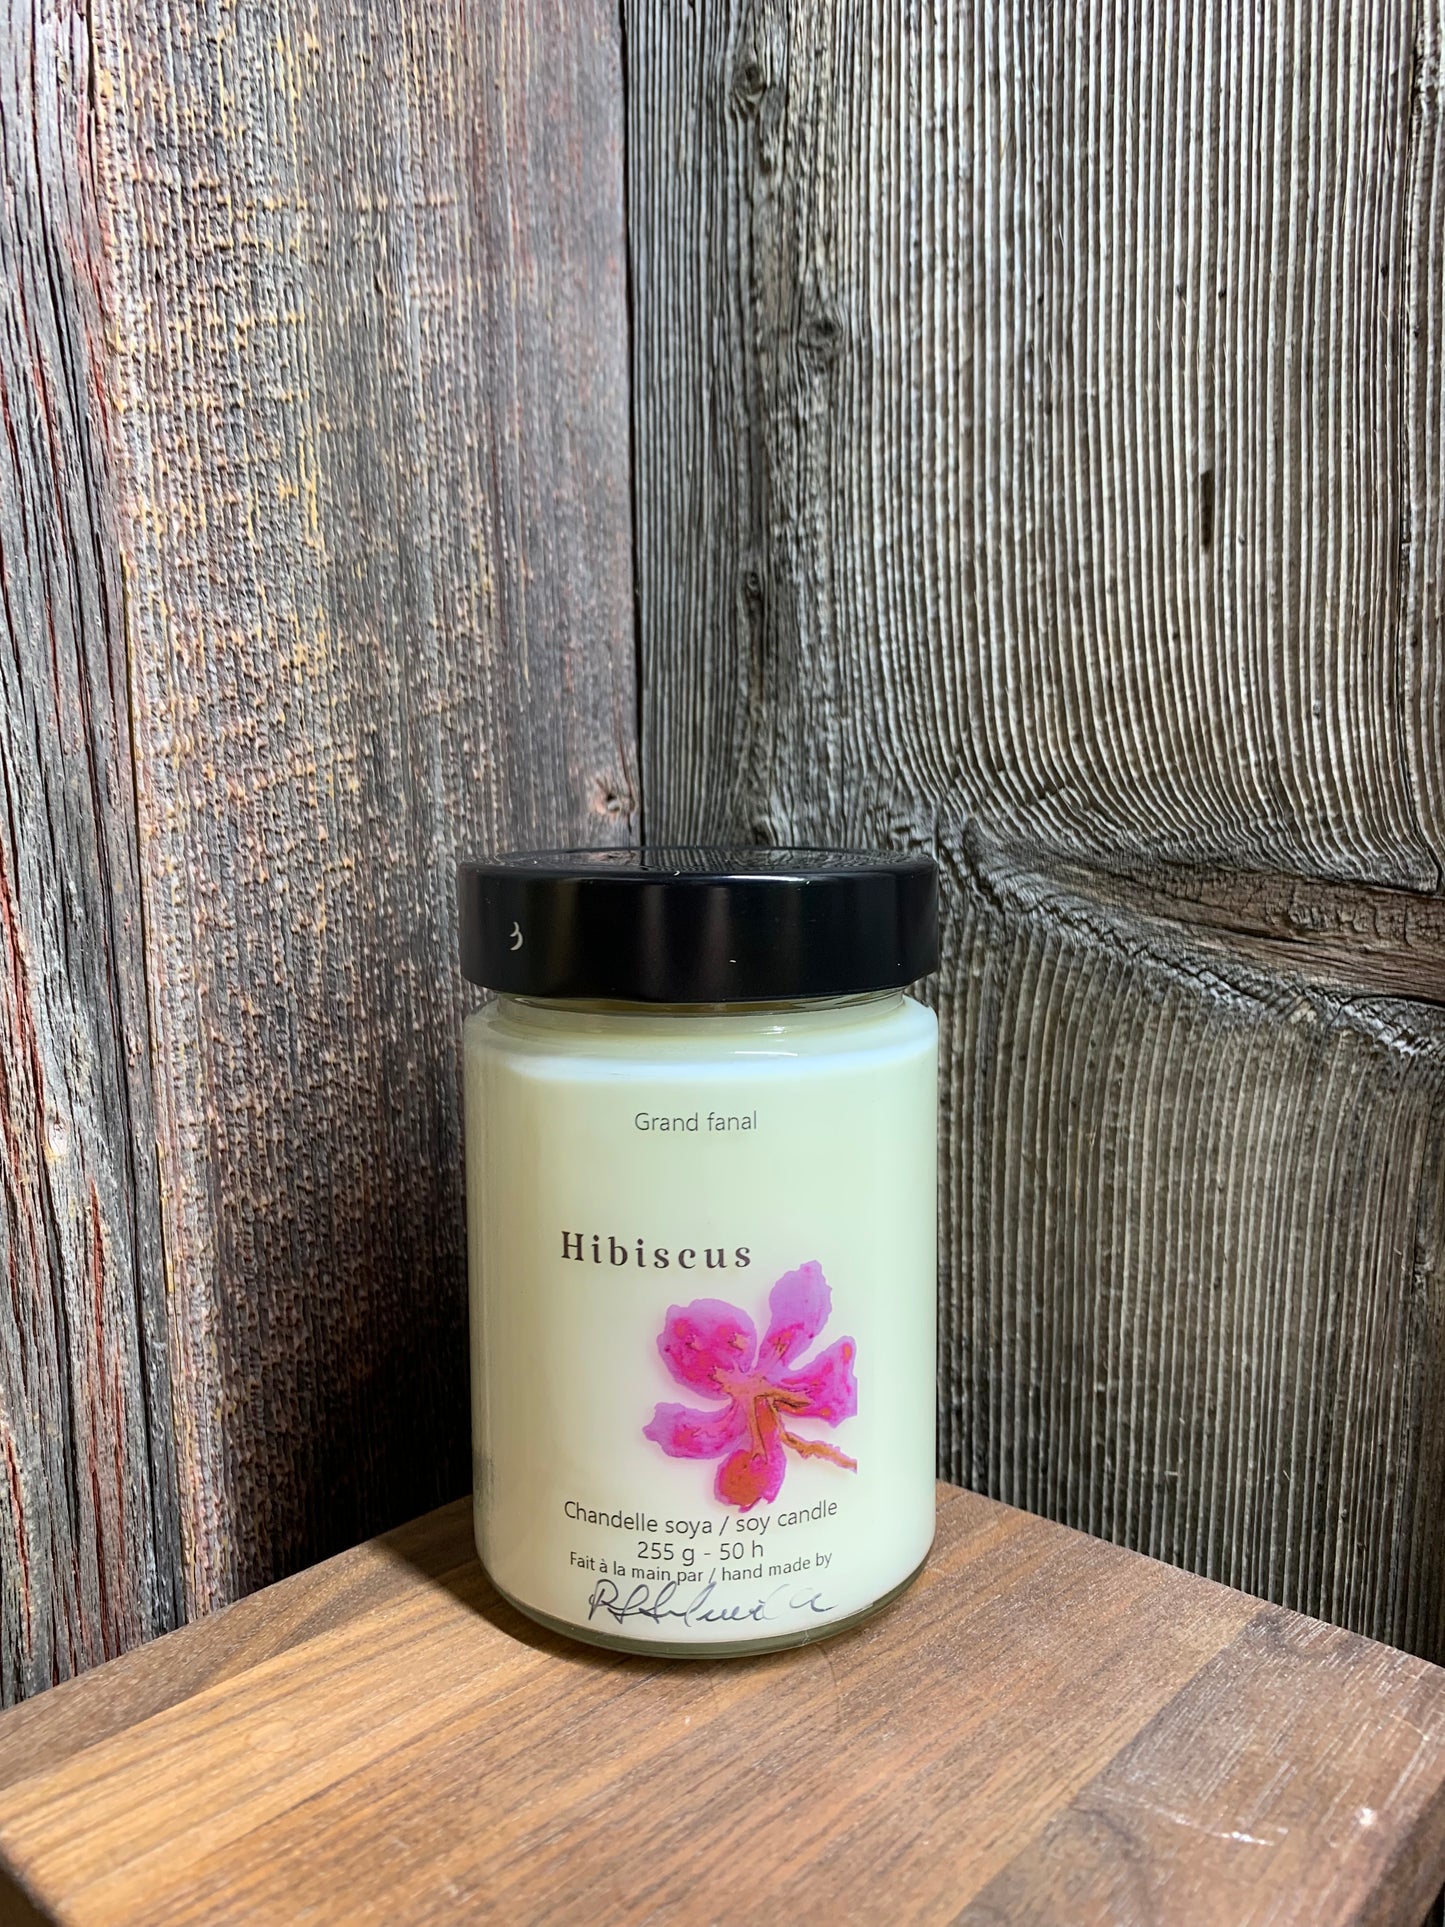 Hibiscus candle